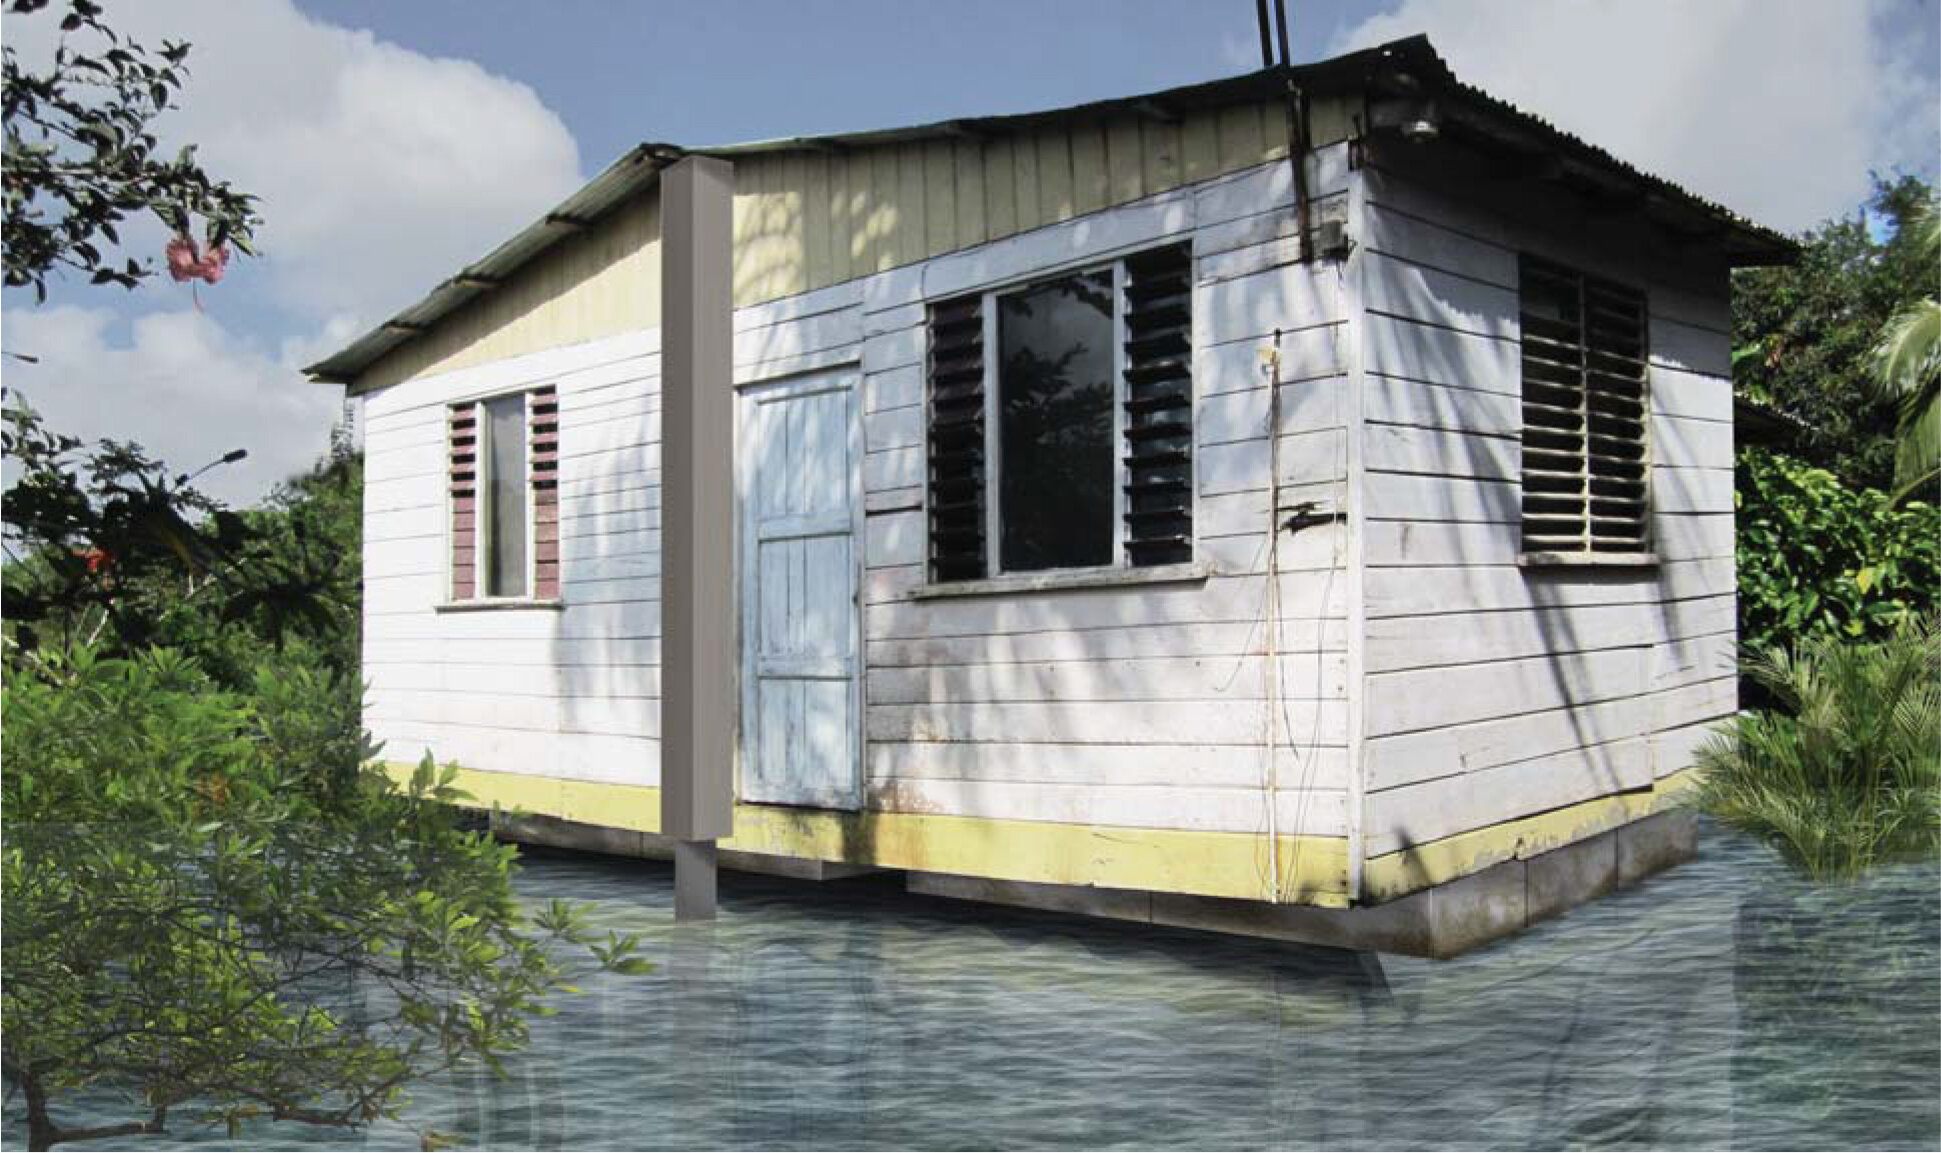  Render of House in Bliss Pastures, Jamaica, Retrofitted and Floating 